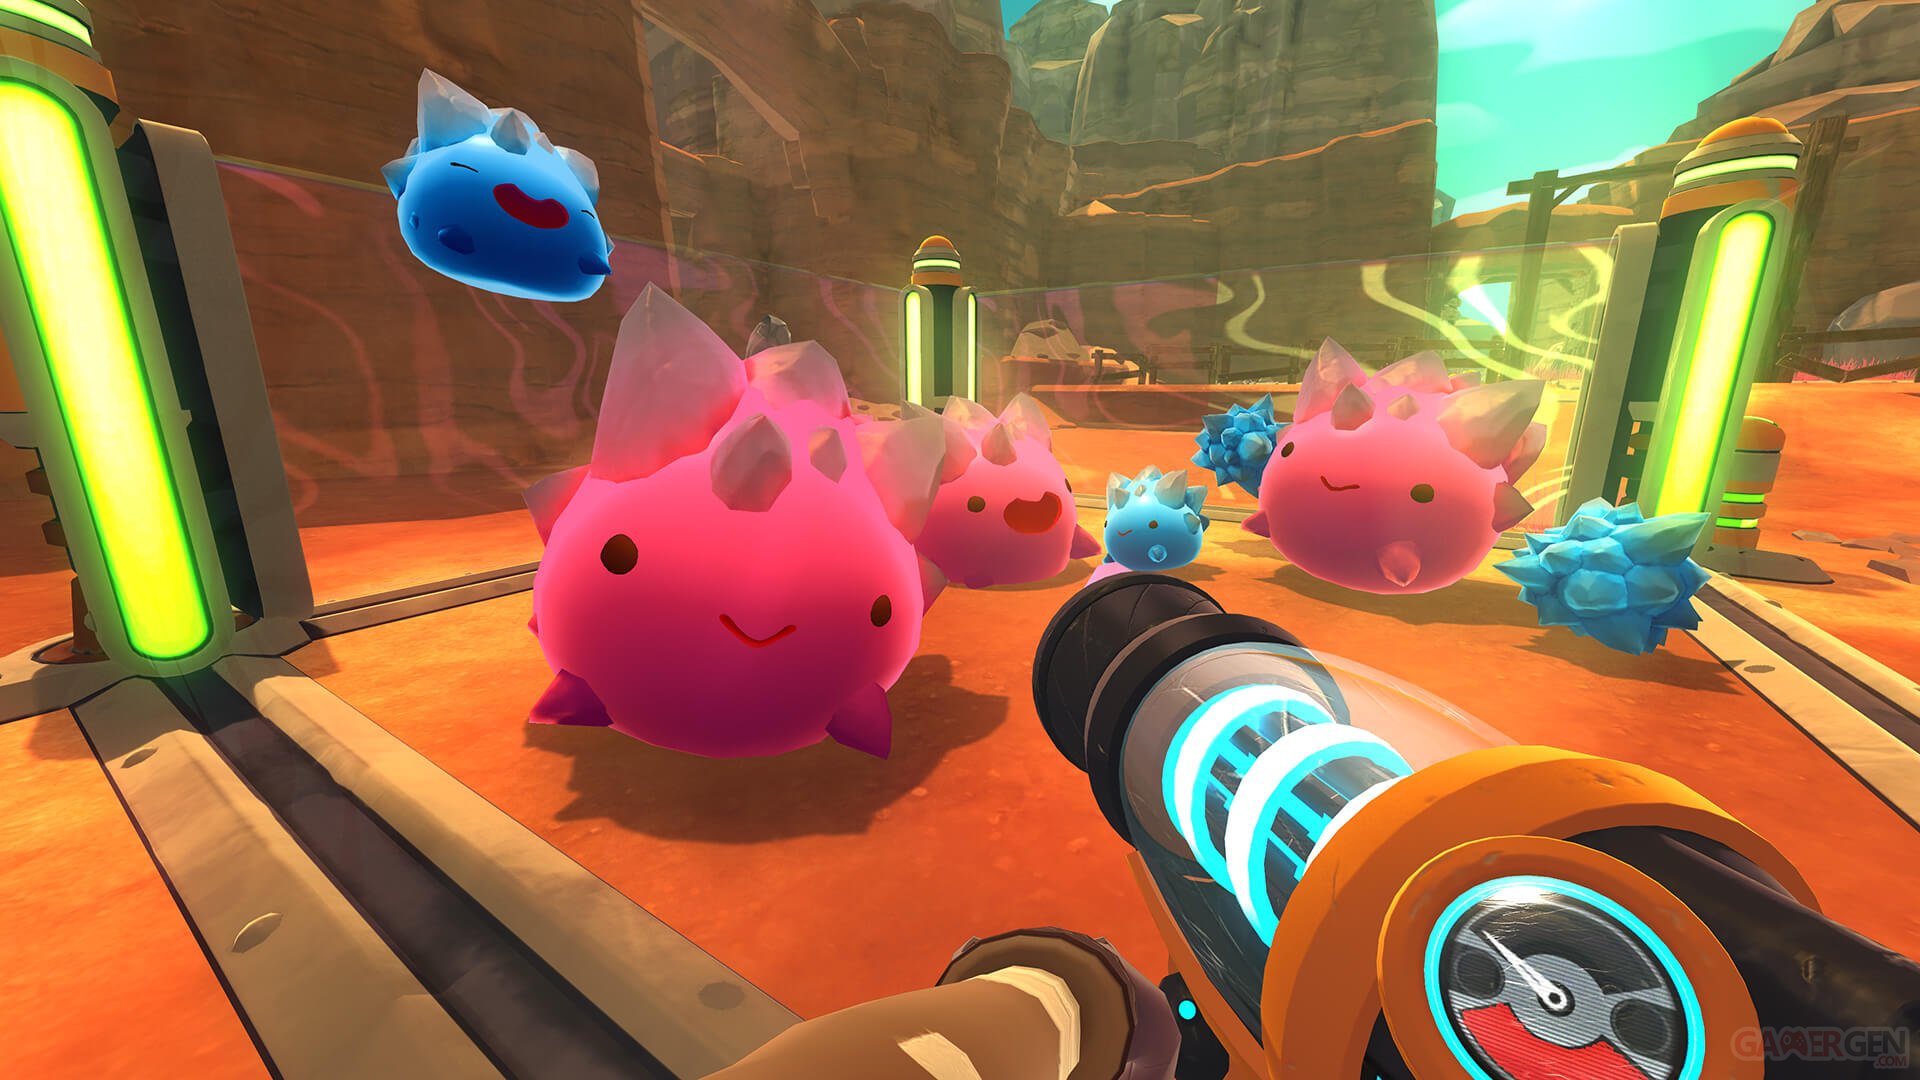 download slime rancher 2 ps5 for free